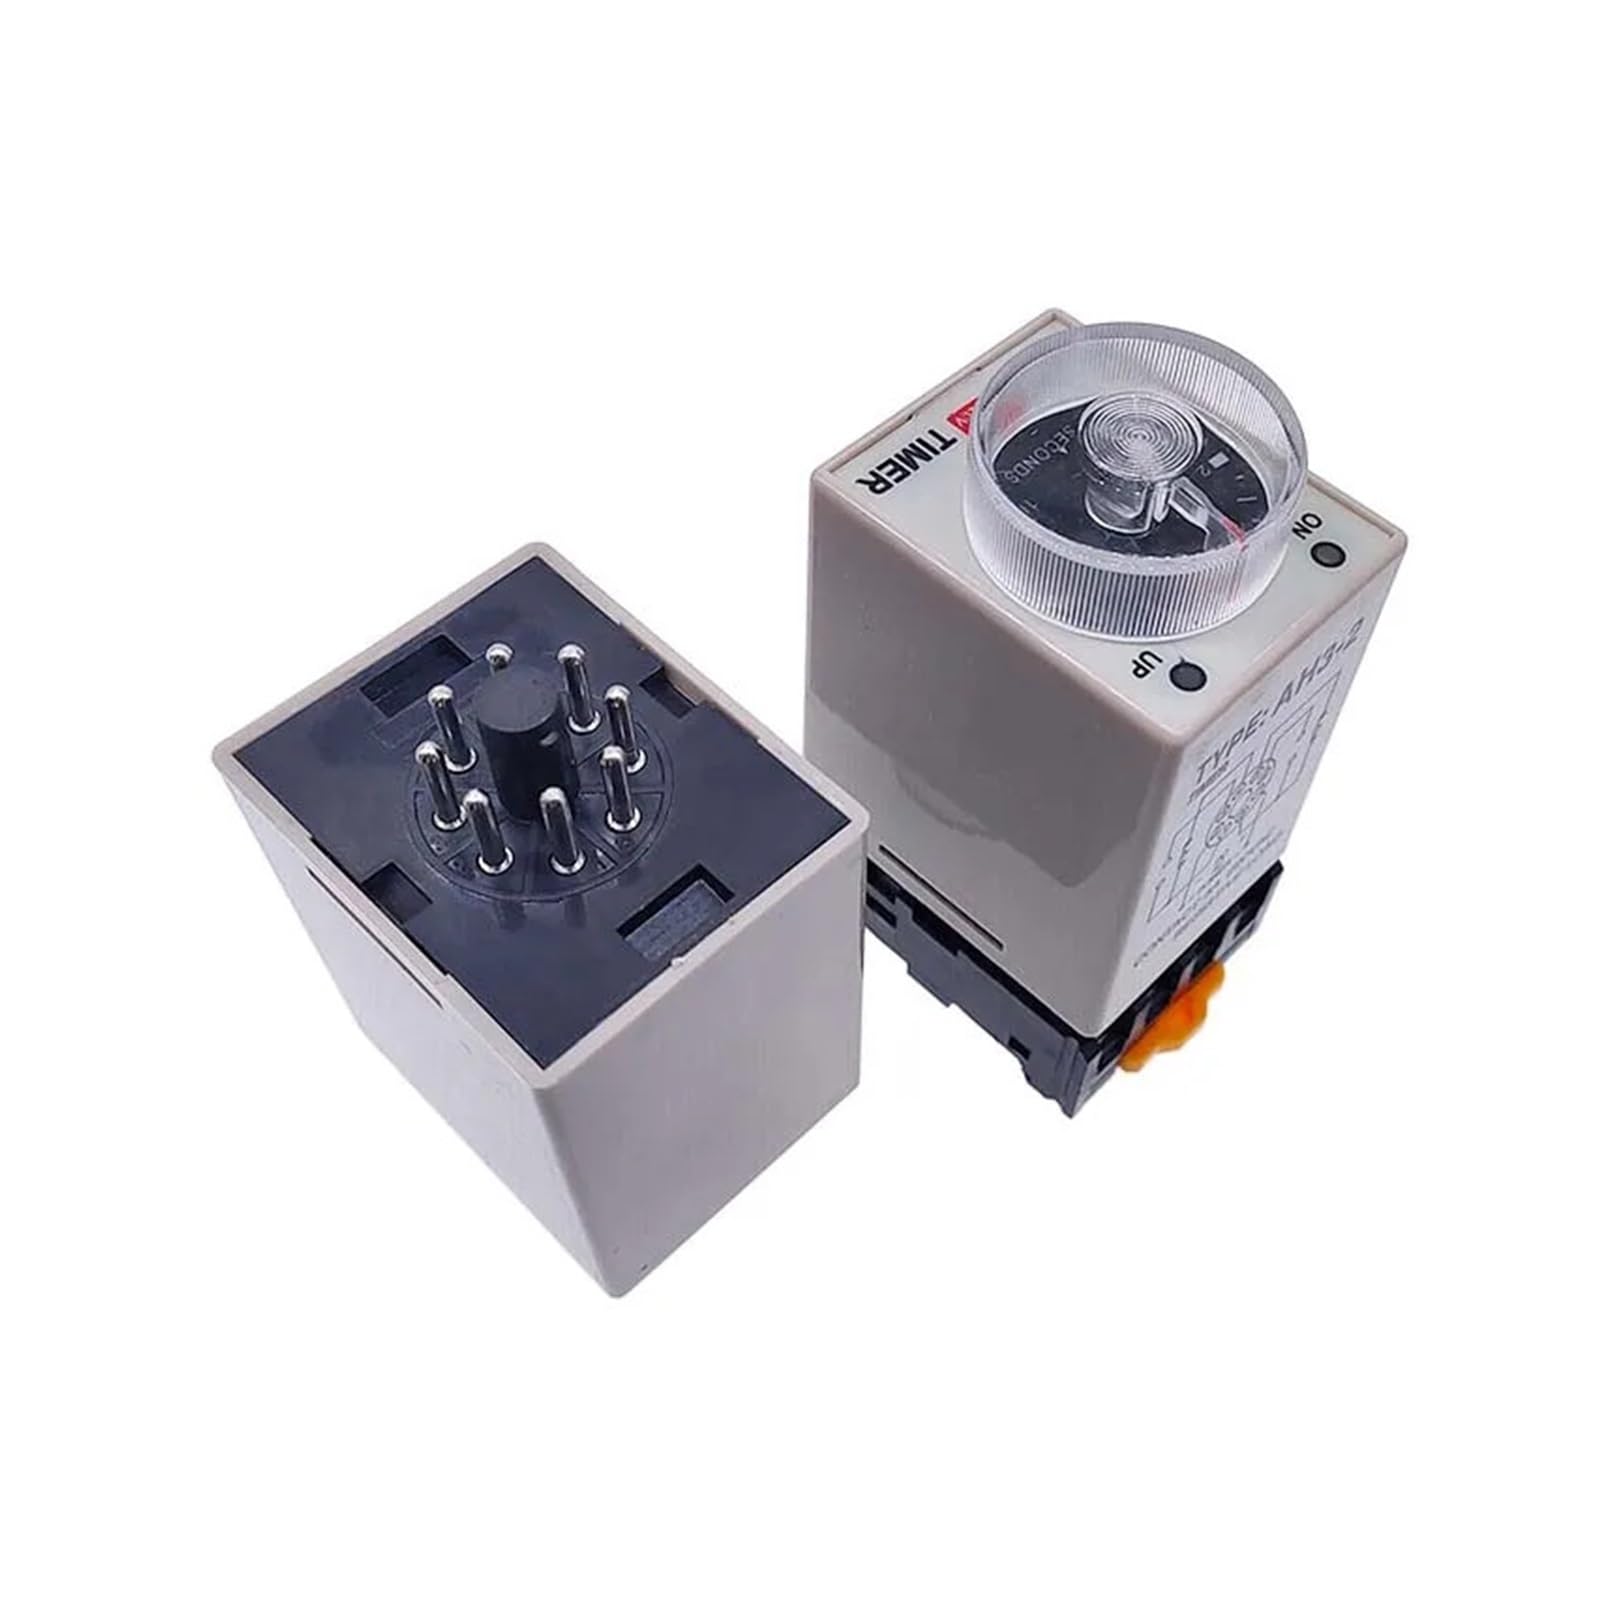 1 PC AH3-2 Power-on Delay Timer AH3-3 Time Relay AC Thick Stitch Time Set Range 1S/5S/10S/30S/60S/5M/10M/30M NWPNLXEA(AC220V,AH3-2 0-1Second) von NWPNLXEA